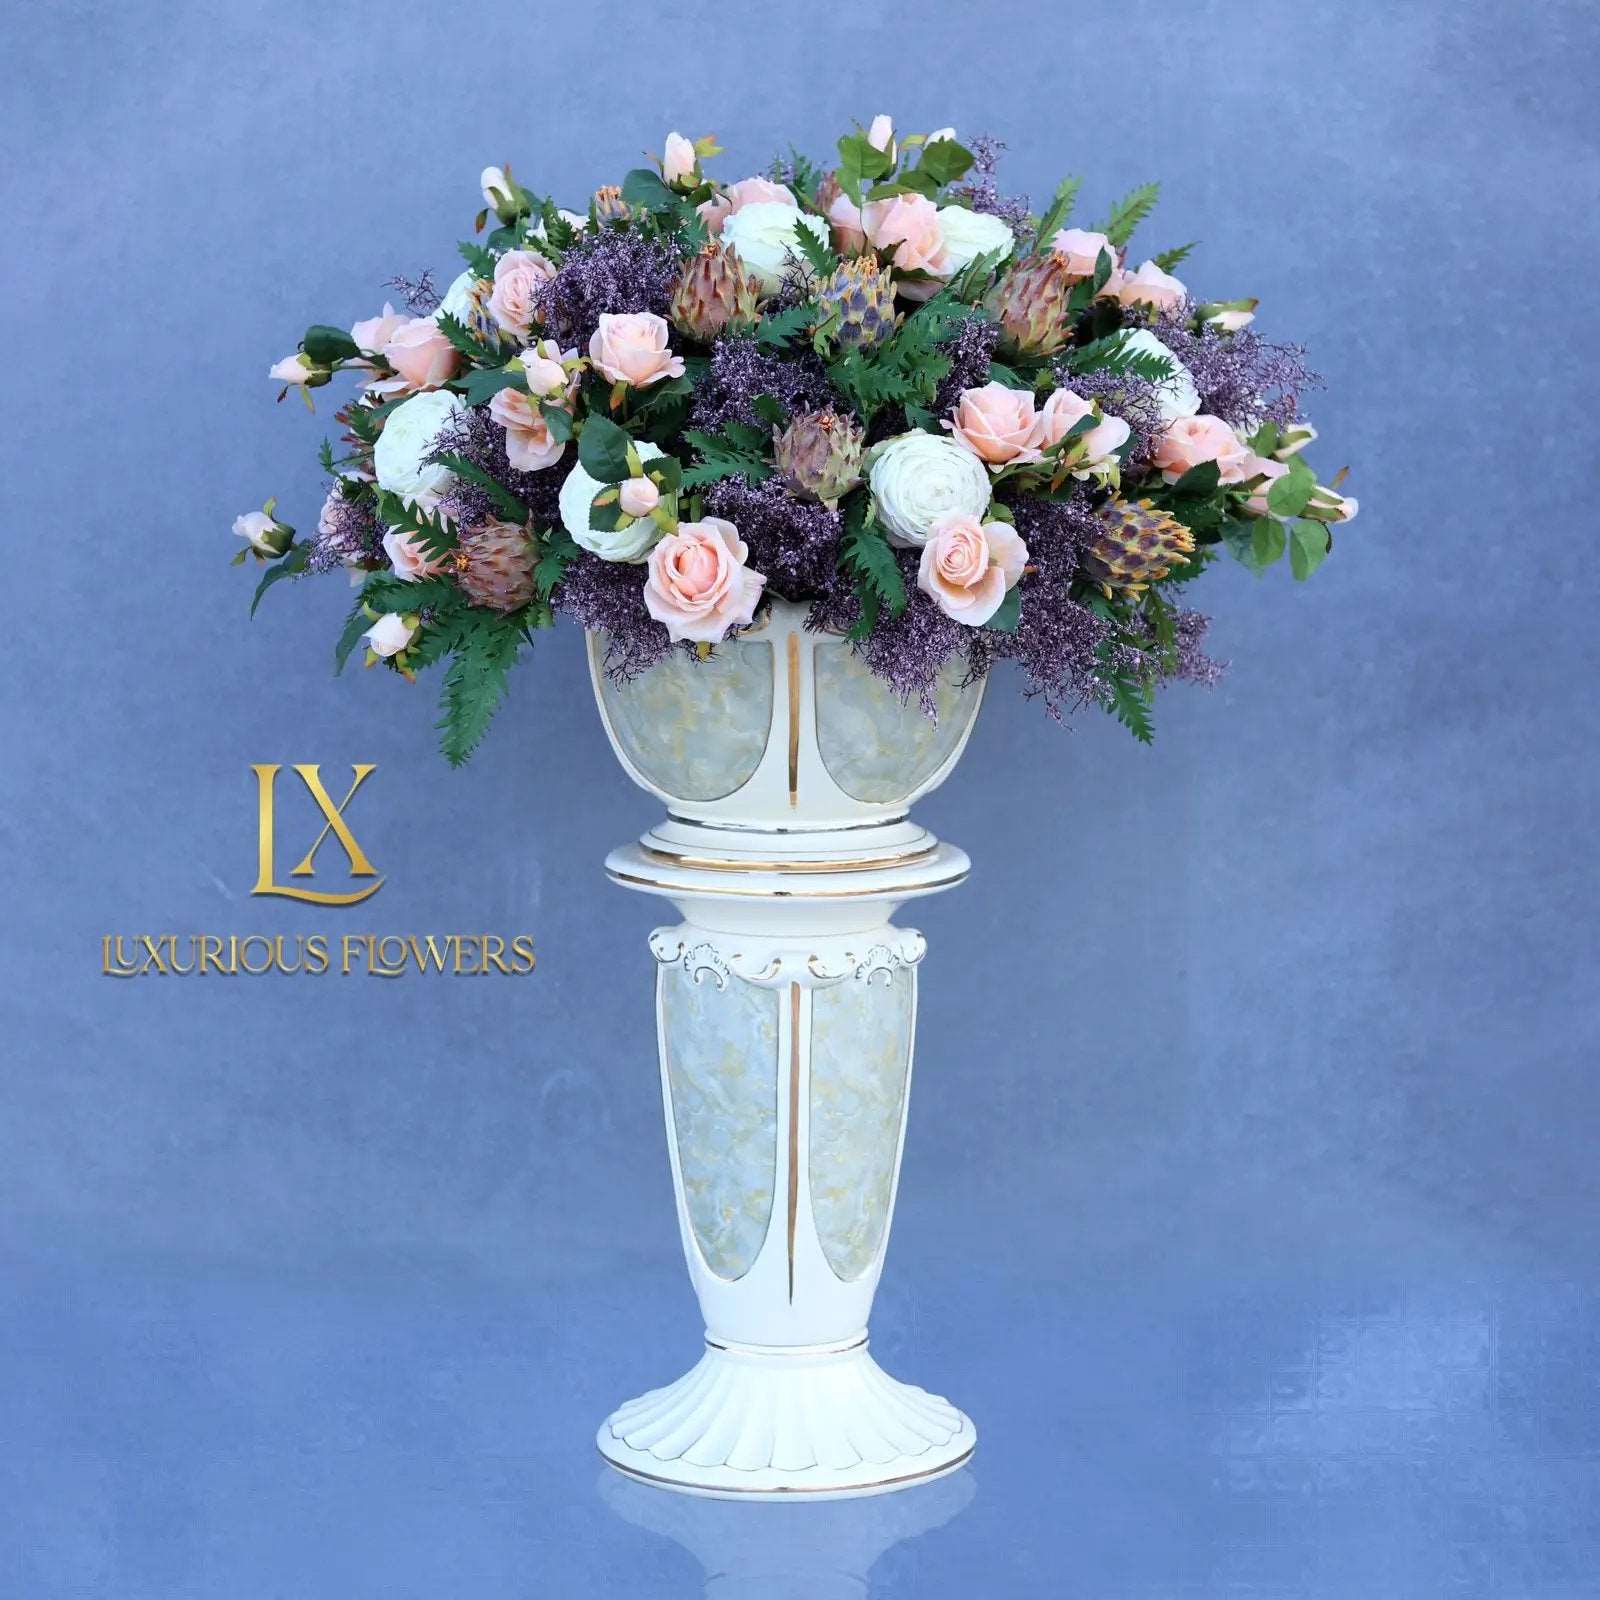 VIP Luxurious Floral stand - Luxurious Flowers VIP Luxurious Floral stand